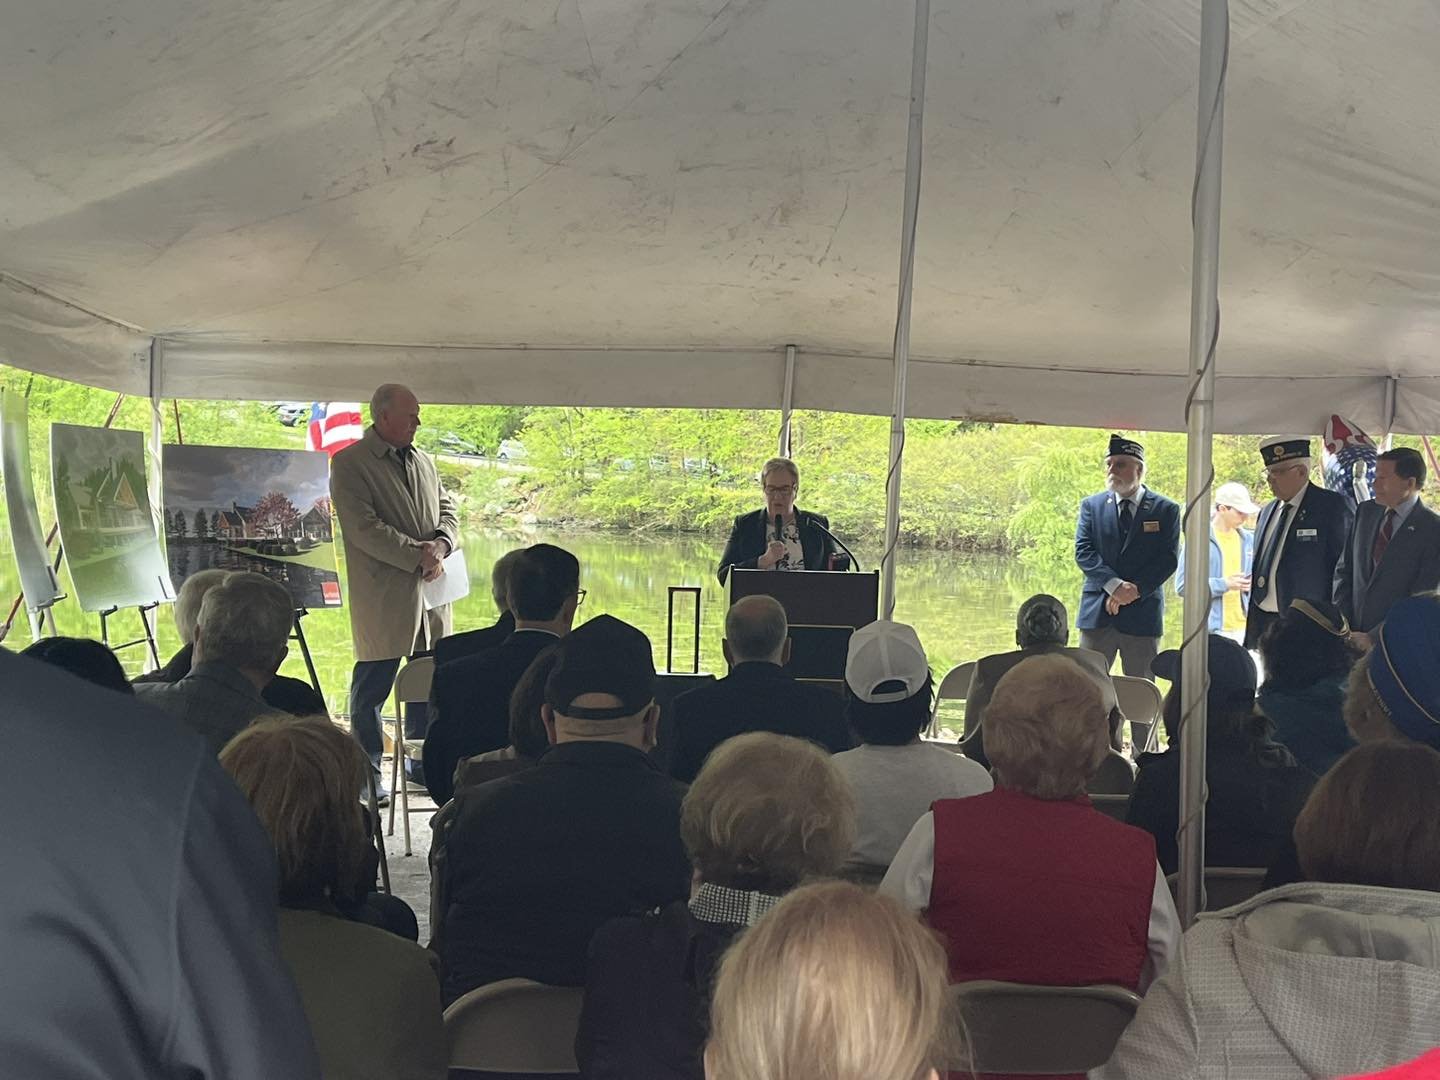 It was a great day to break ground on Trumbull&rsquo;s new Veterans and First Responders Center. Thank you to our Congressional and State Delegation for securing critical funds. To the building committee, chaired by former First Selectman Ray Baldwin